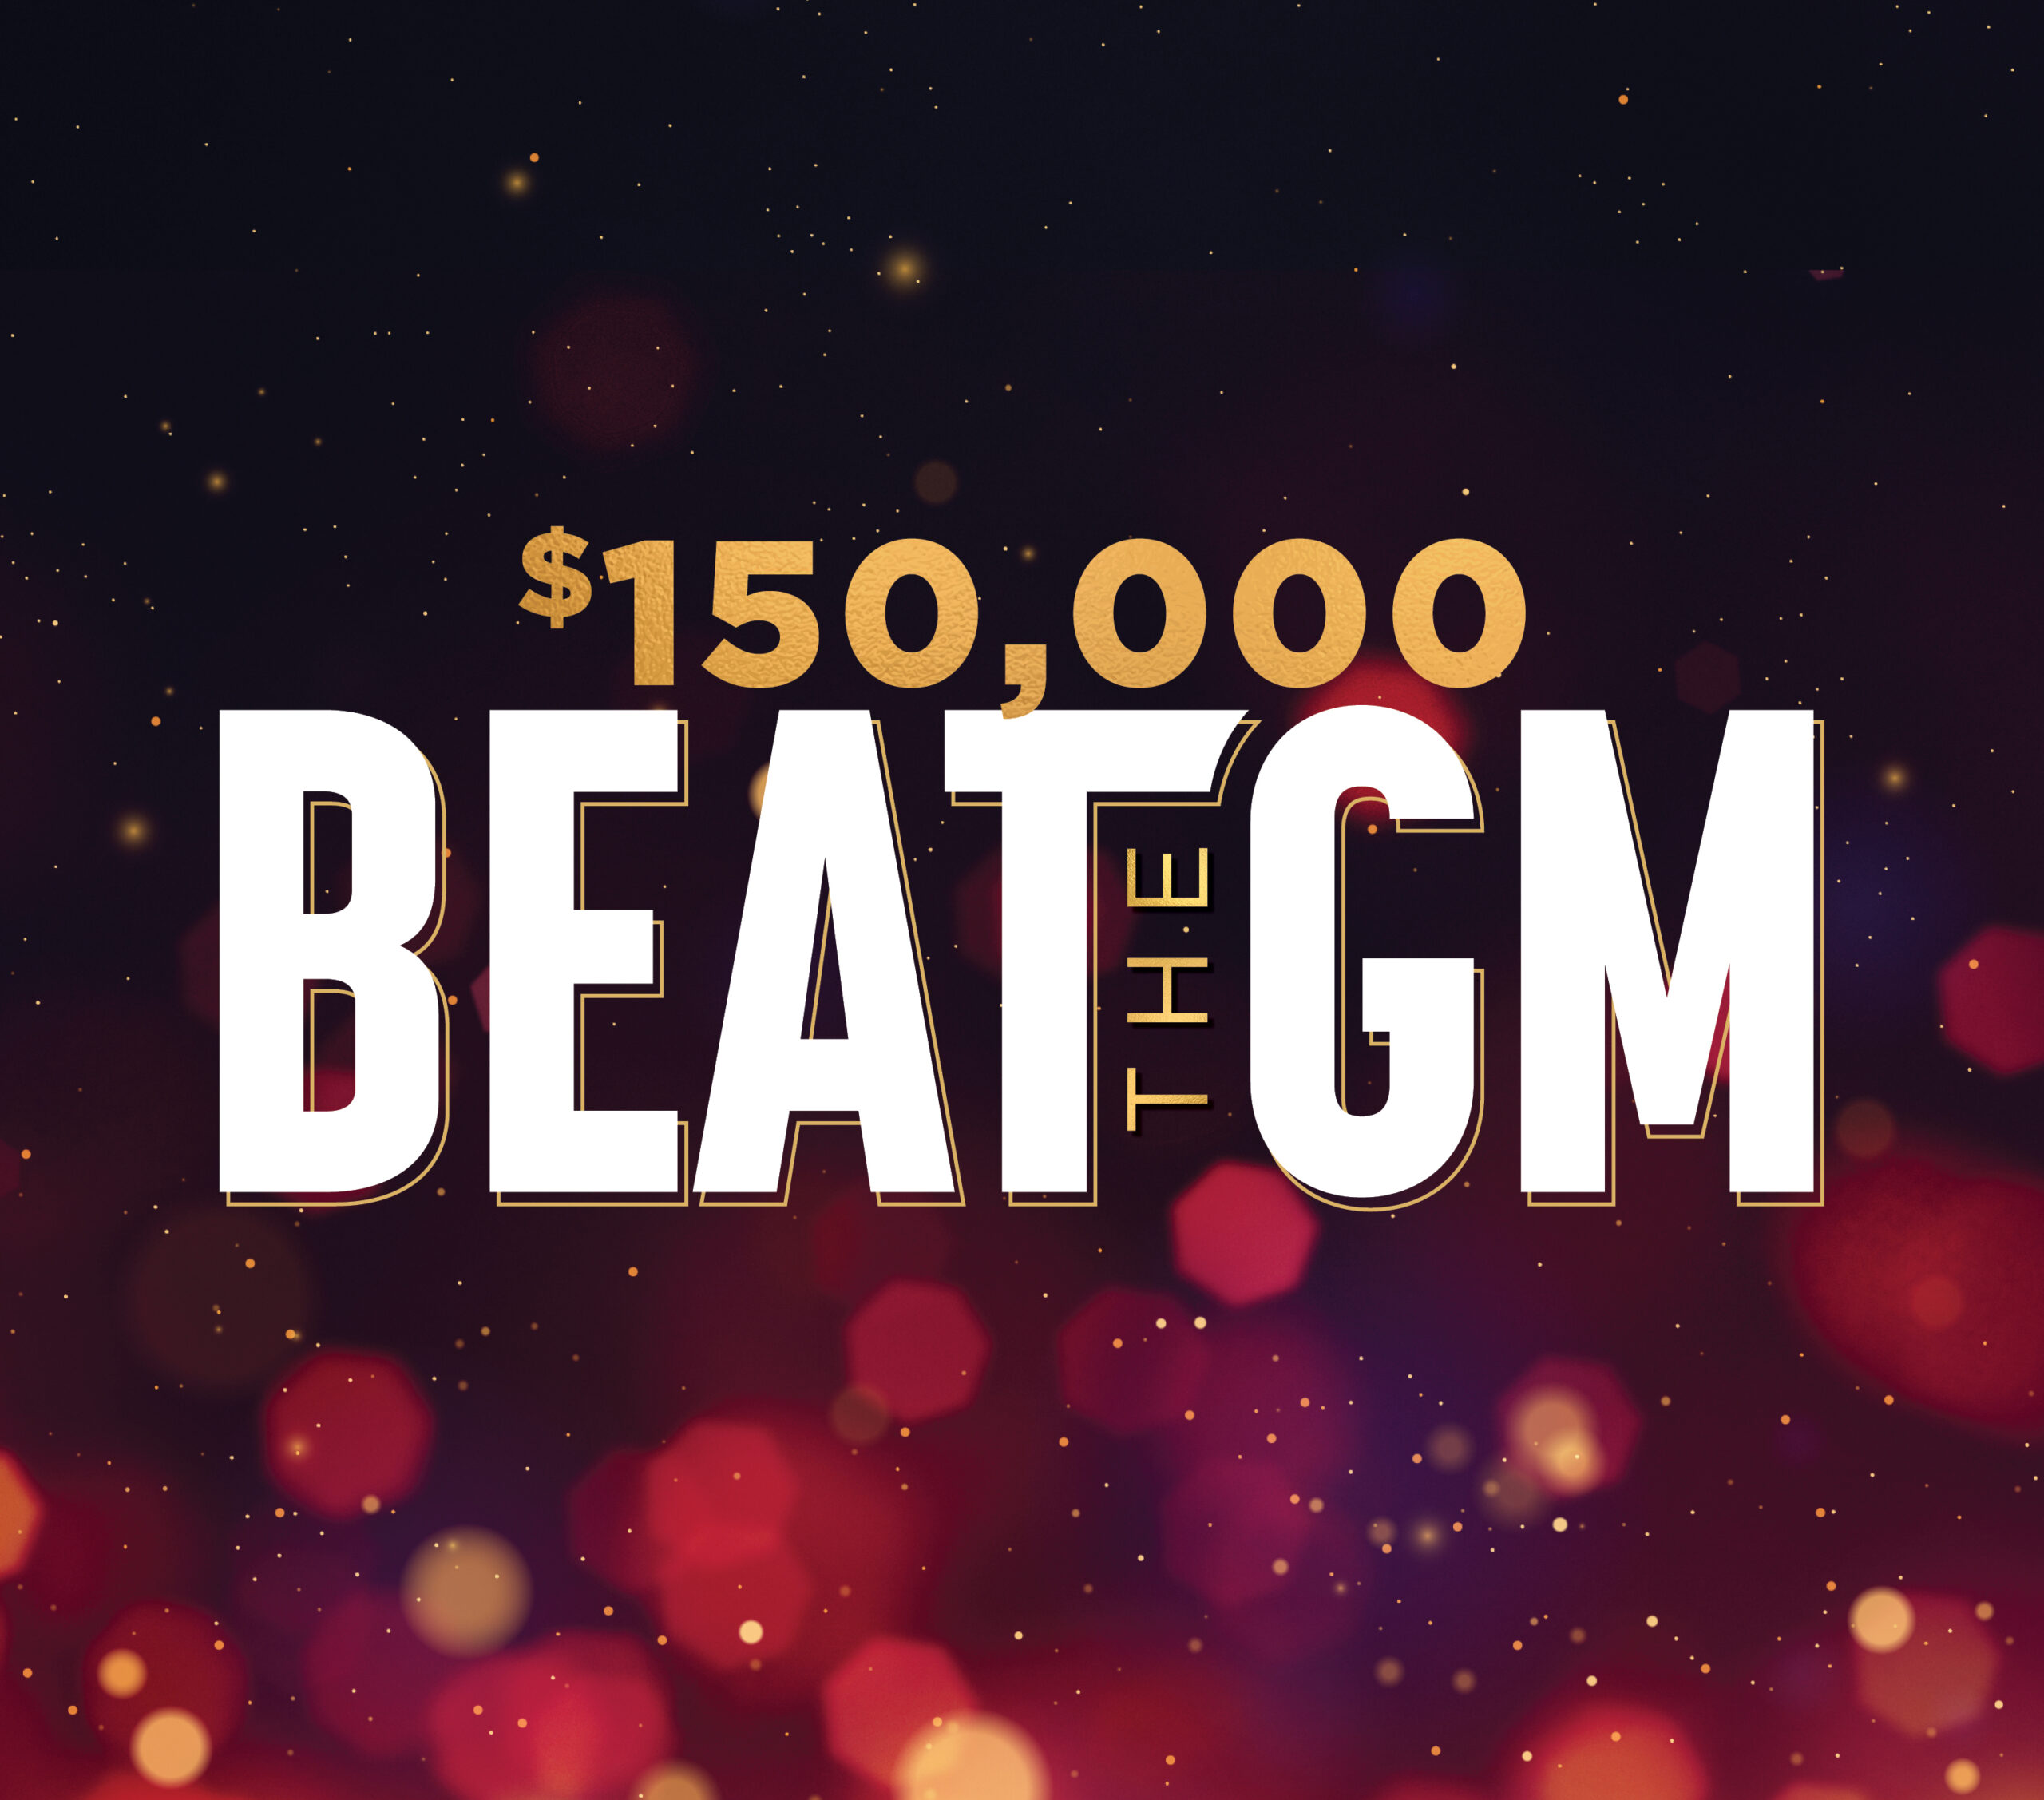 $150,000 BEAT THE GM